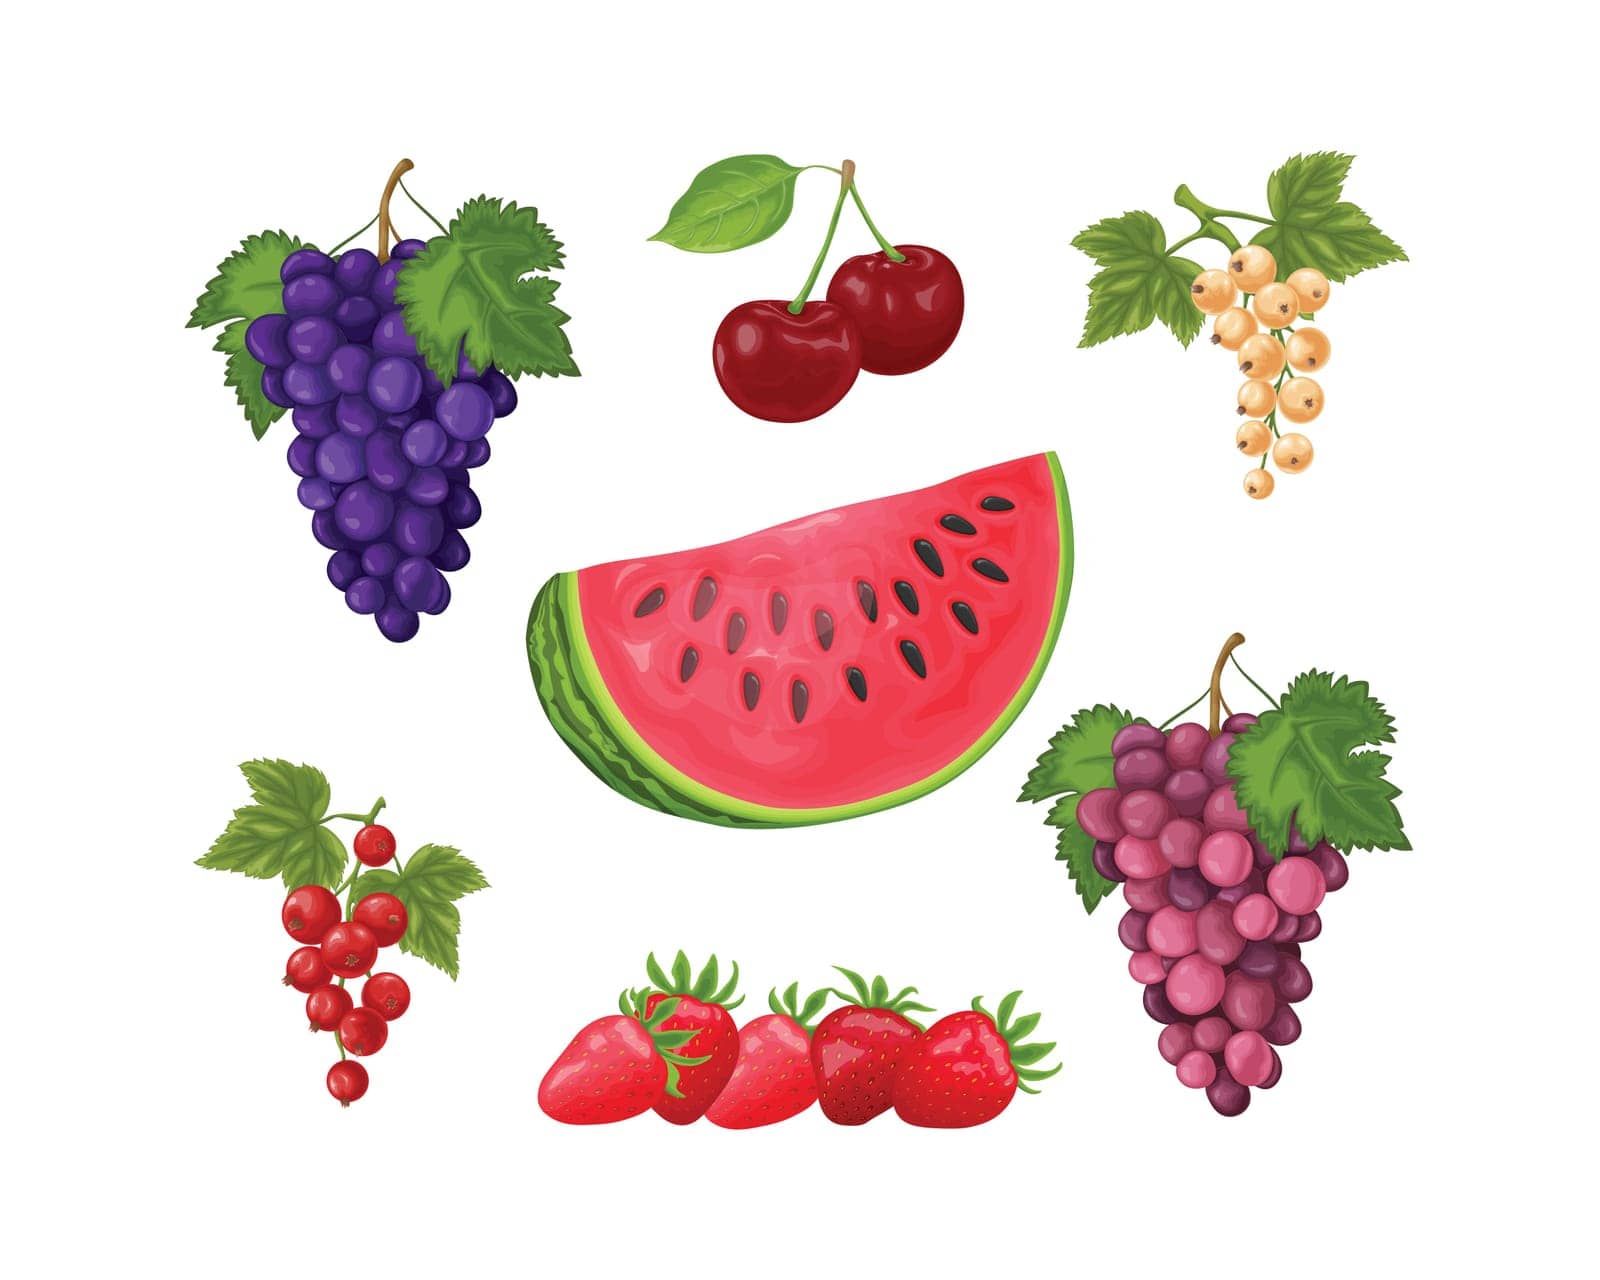 Fruit set. A large set of fruits, such as watermelon, grapes, cherries, red and white currants, and strawberries. Summer fruits. Vector illustration.